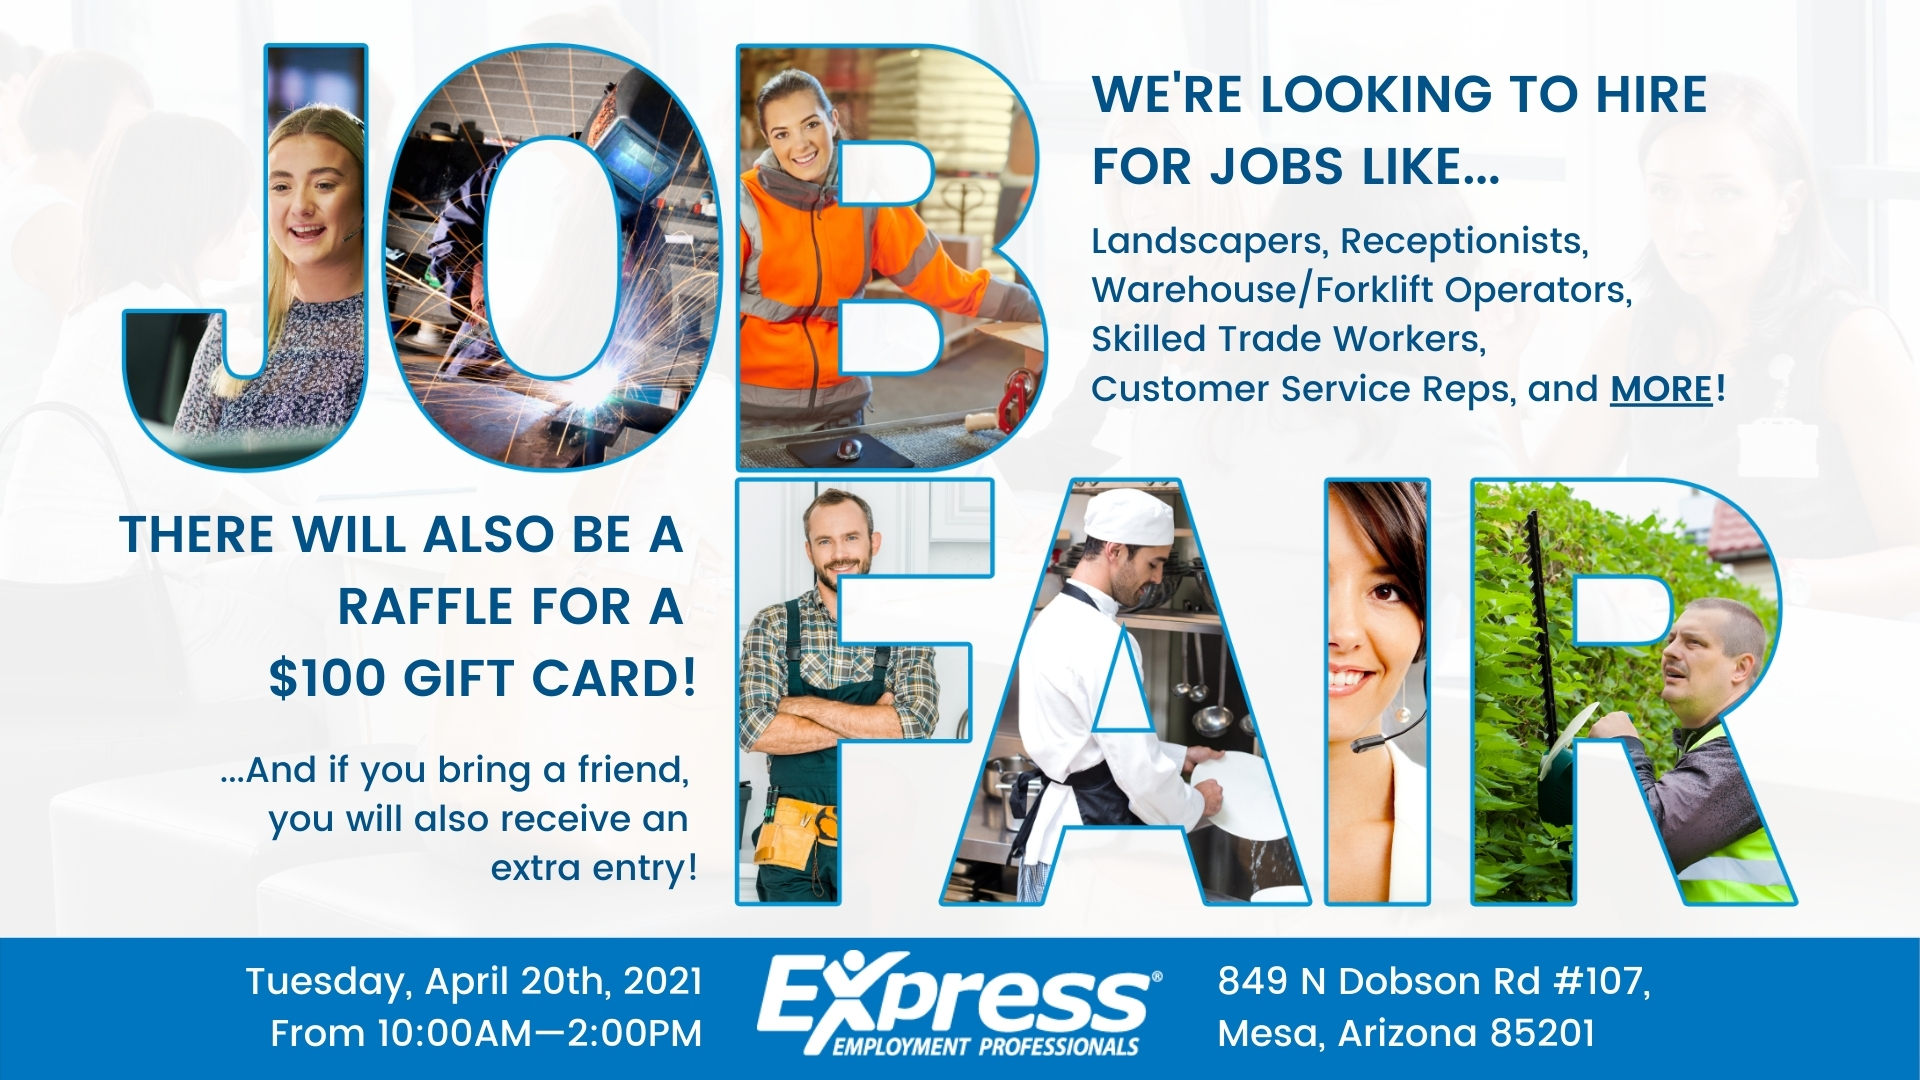 Express is Hosting a Job Fair in Mesa on April 20th, 2021!